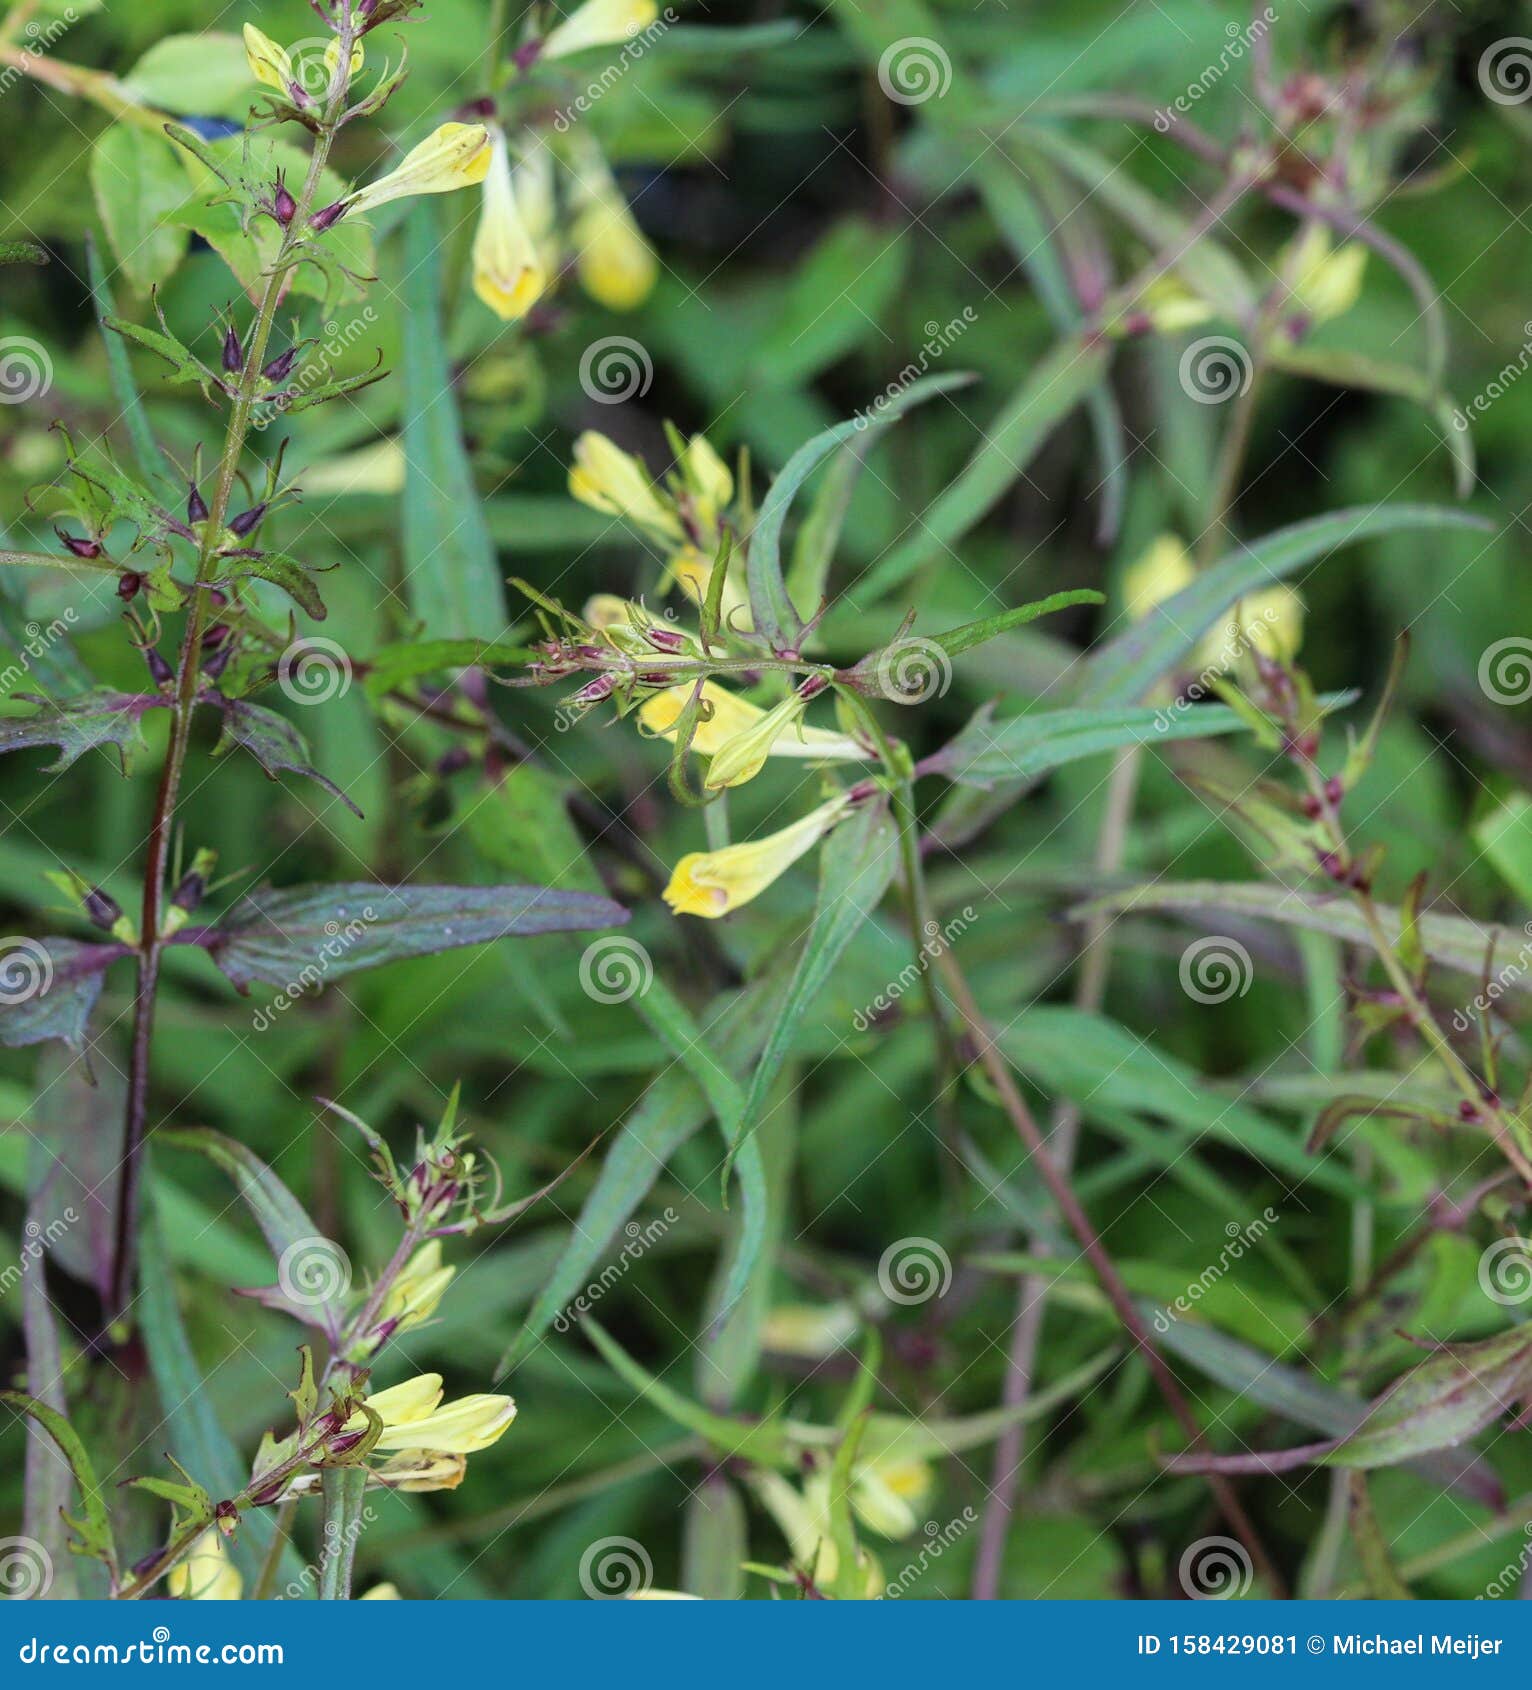 melampyrum lineare, commonly called the narrowleaf cow wheat flower